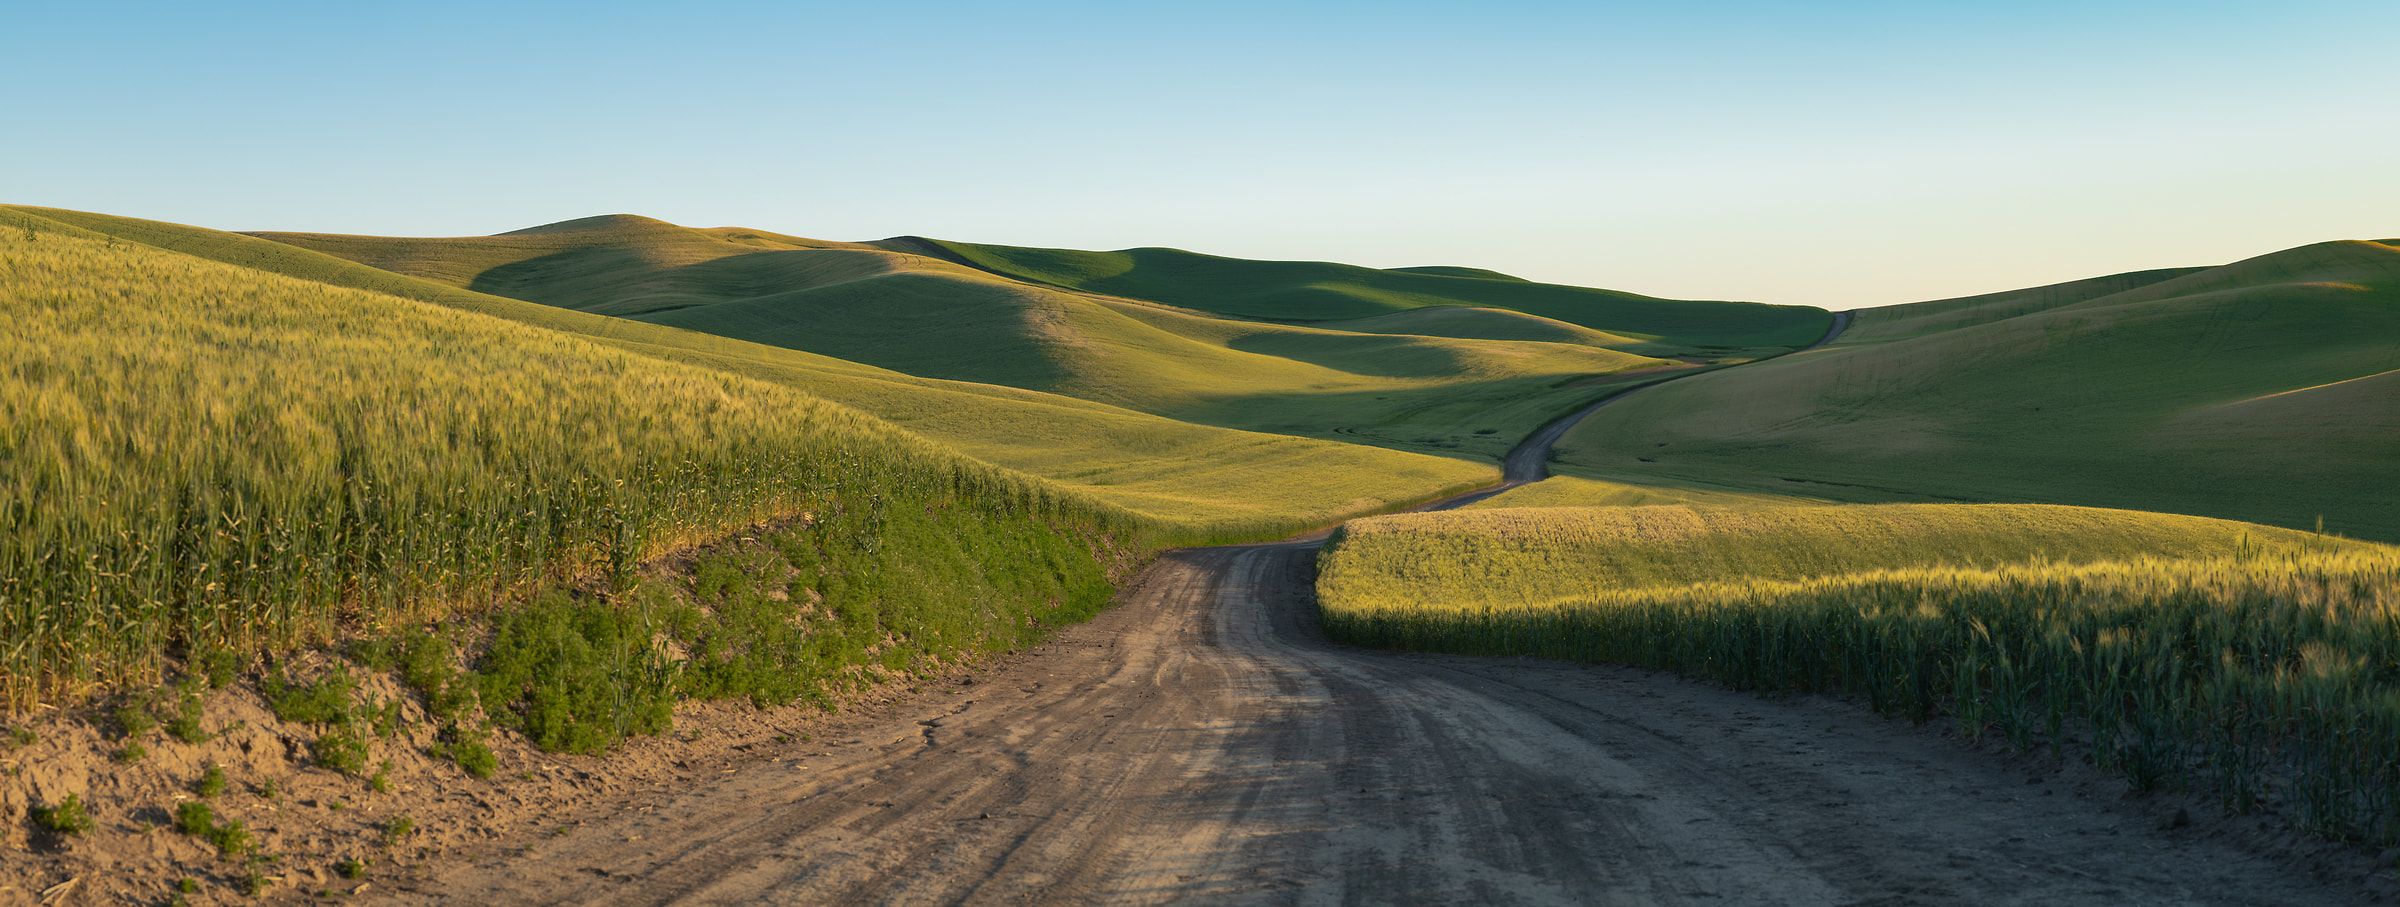 408 megapixels! A very high resolution, large-format VAST photo print of a dirt road going through a wheat field; landscape photograph created by Greg Probst in Palouse, Washington